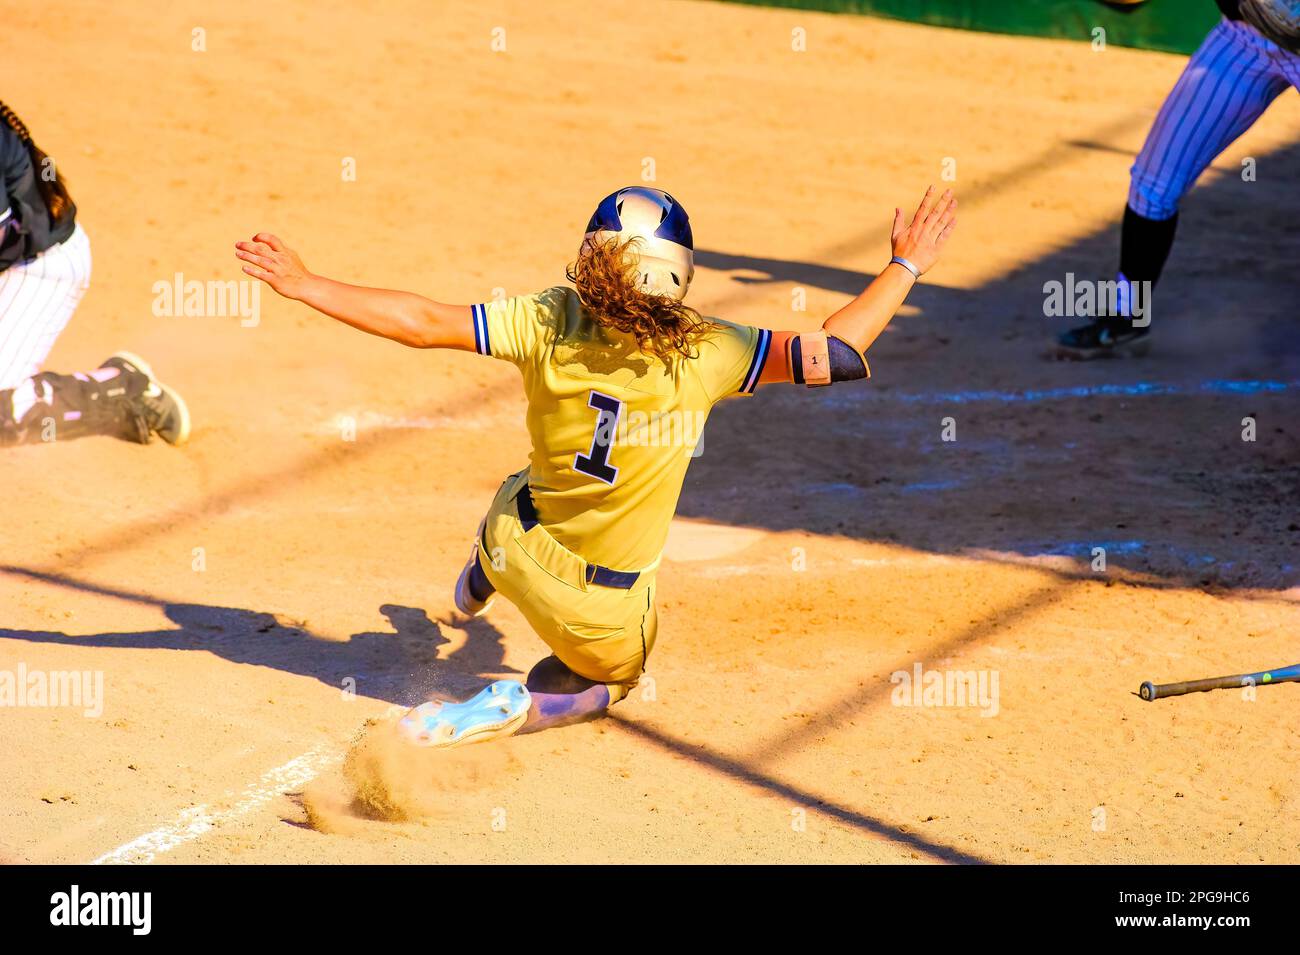 A Female Softball Player Is Sliding Into Home Plate Stock Photo